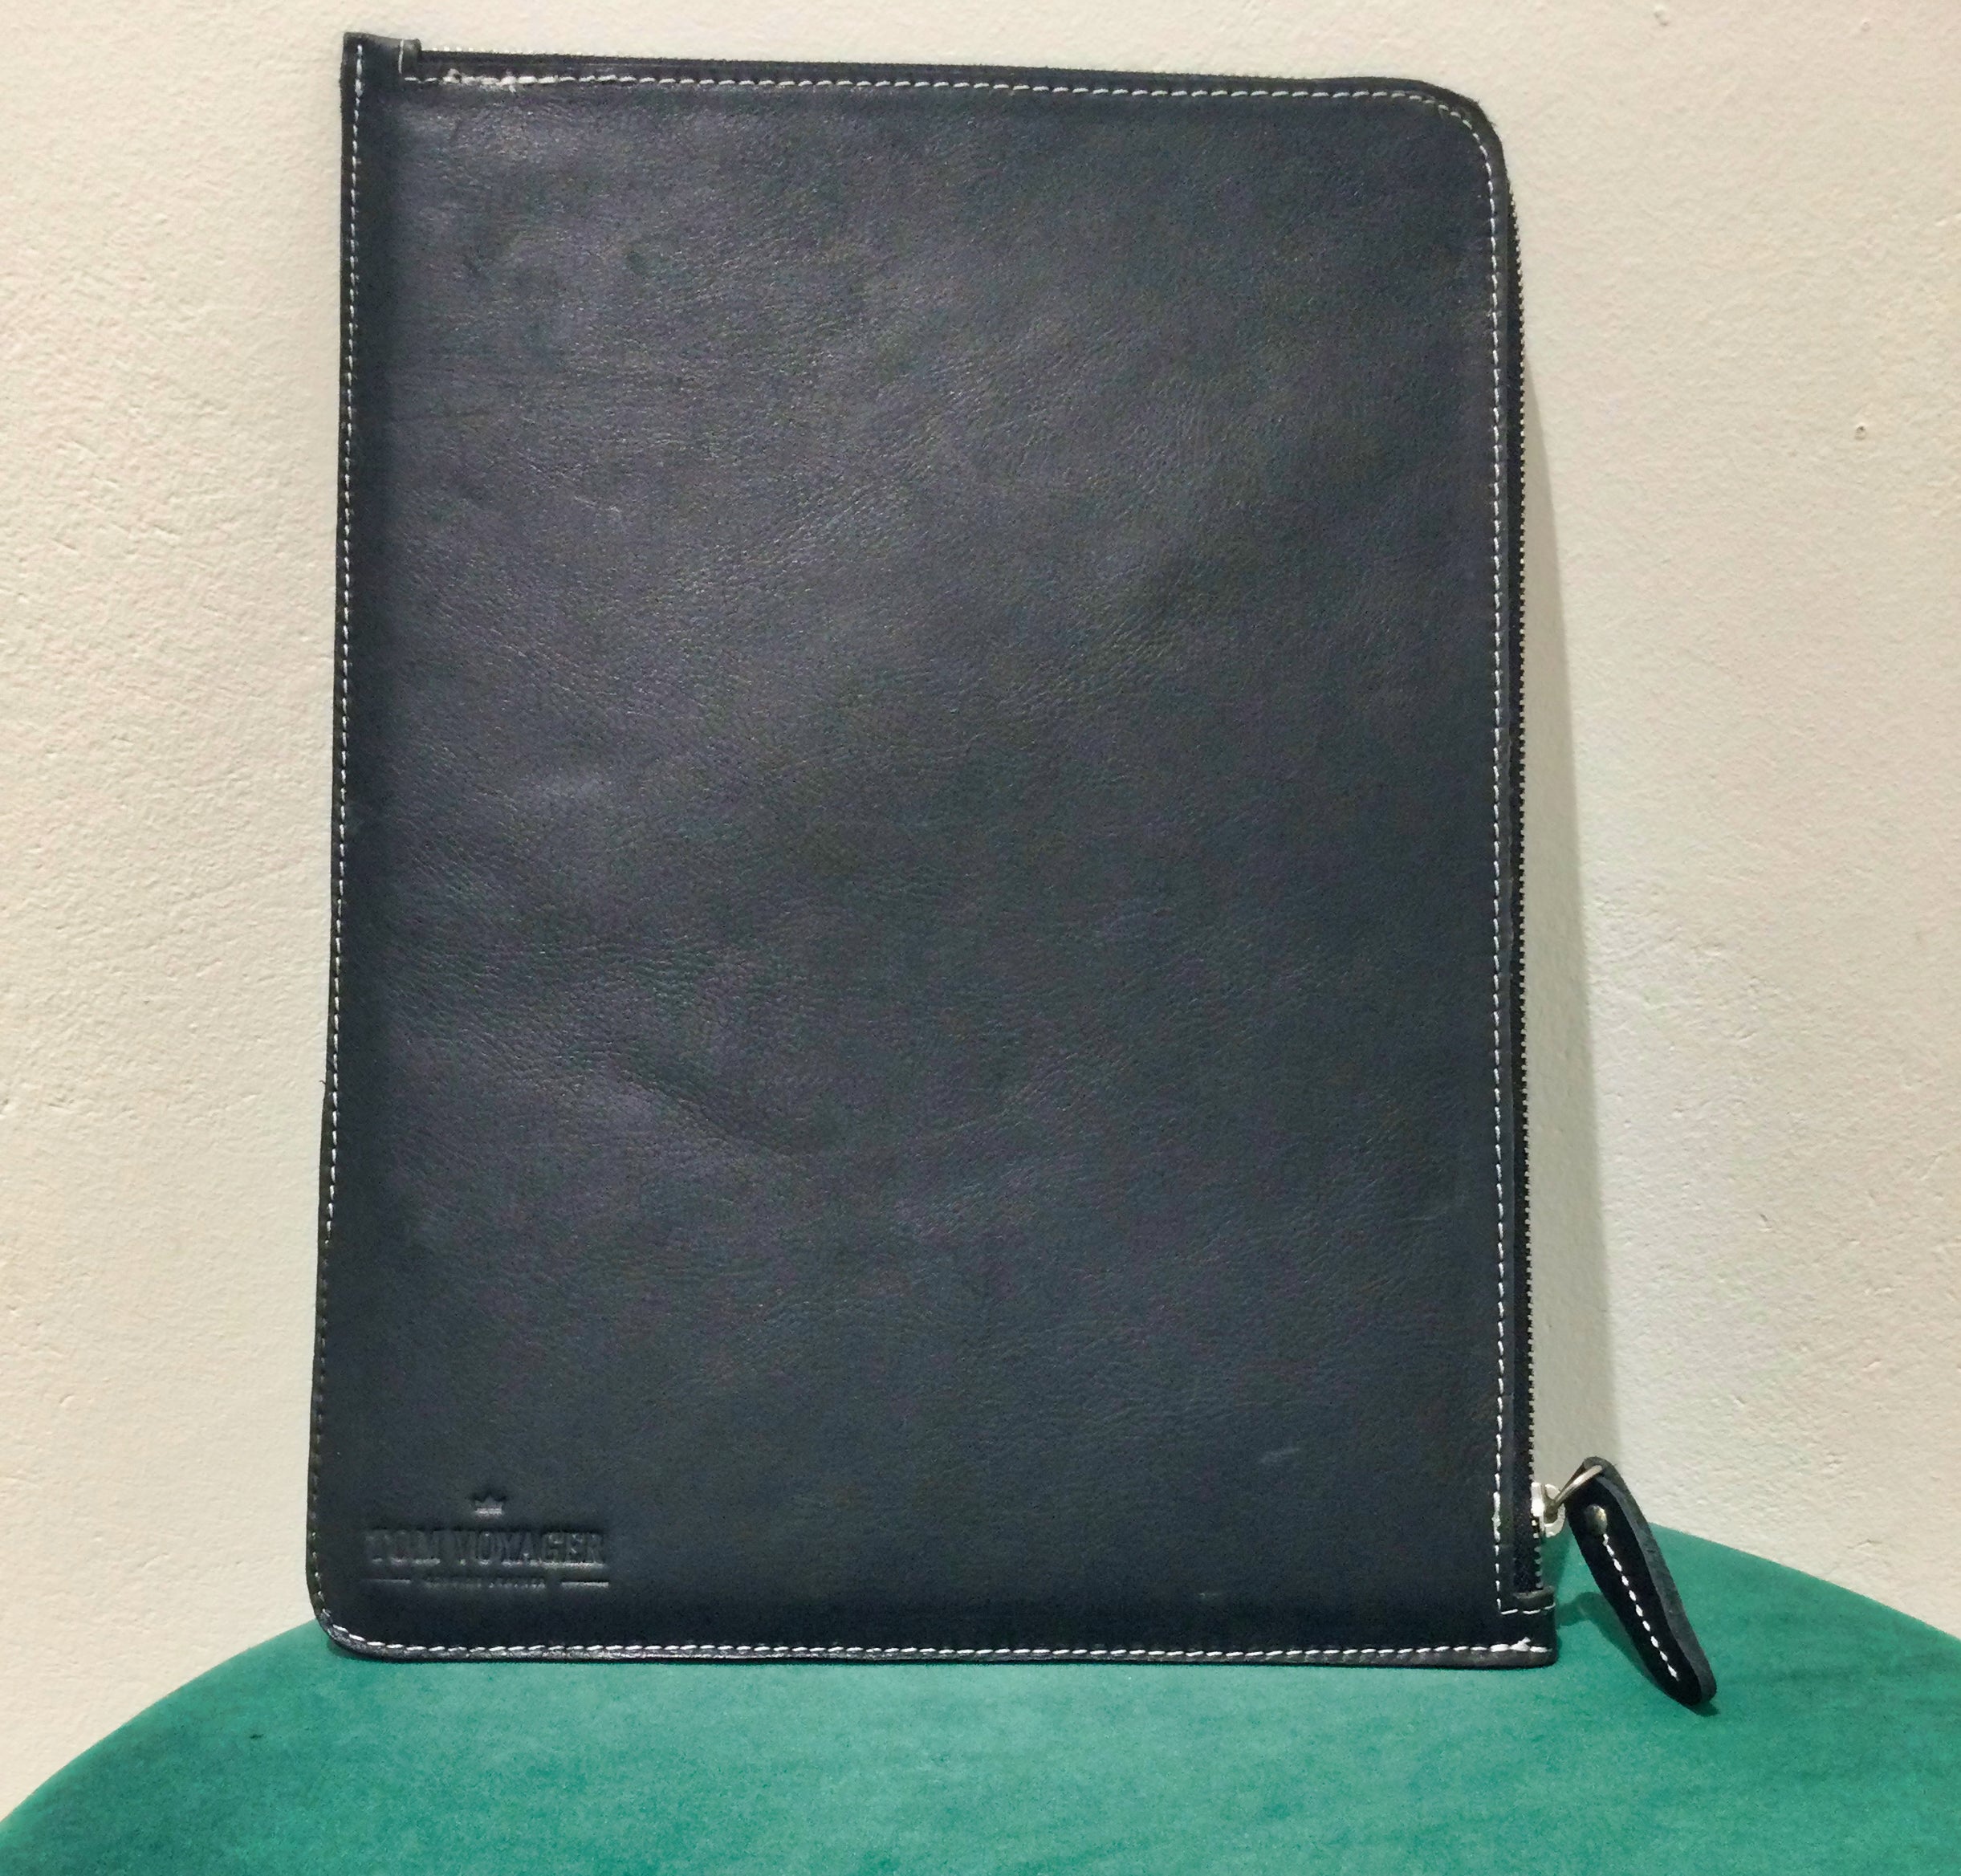 Notebook Cover - Black